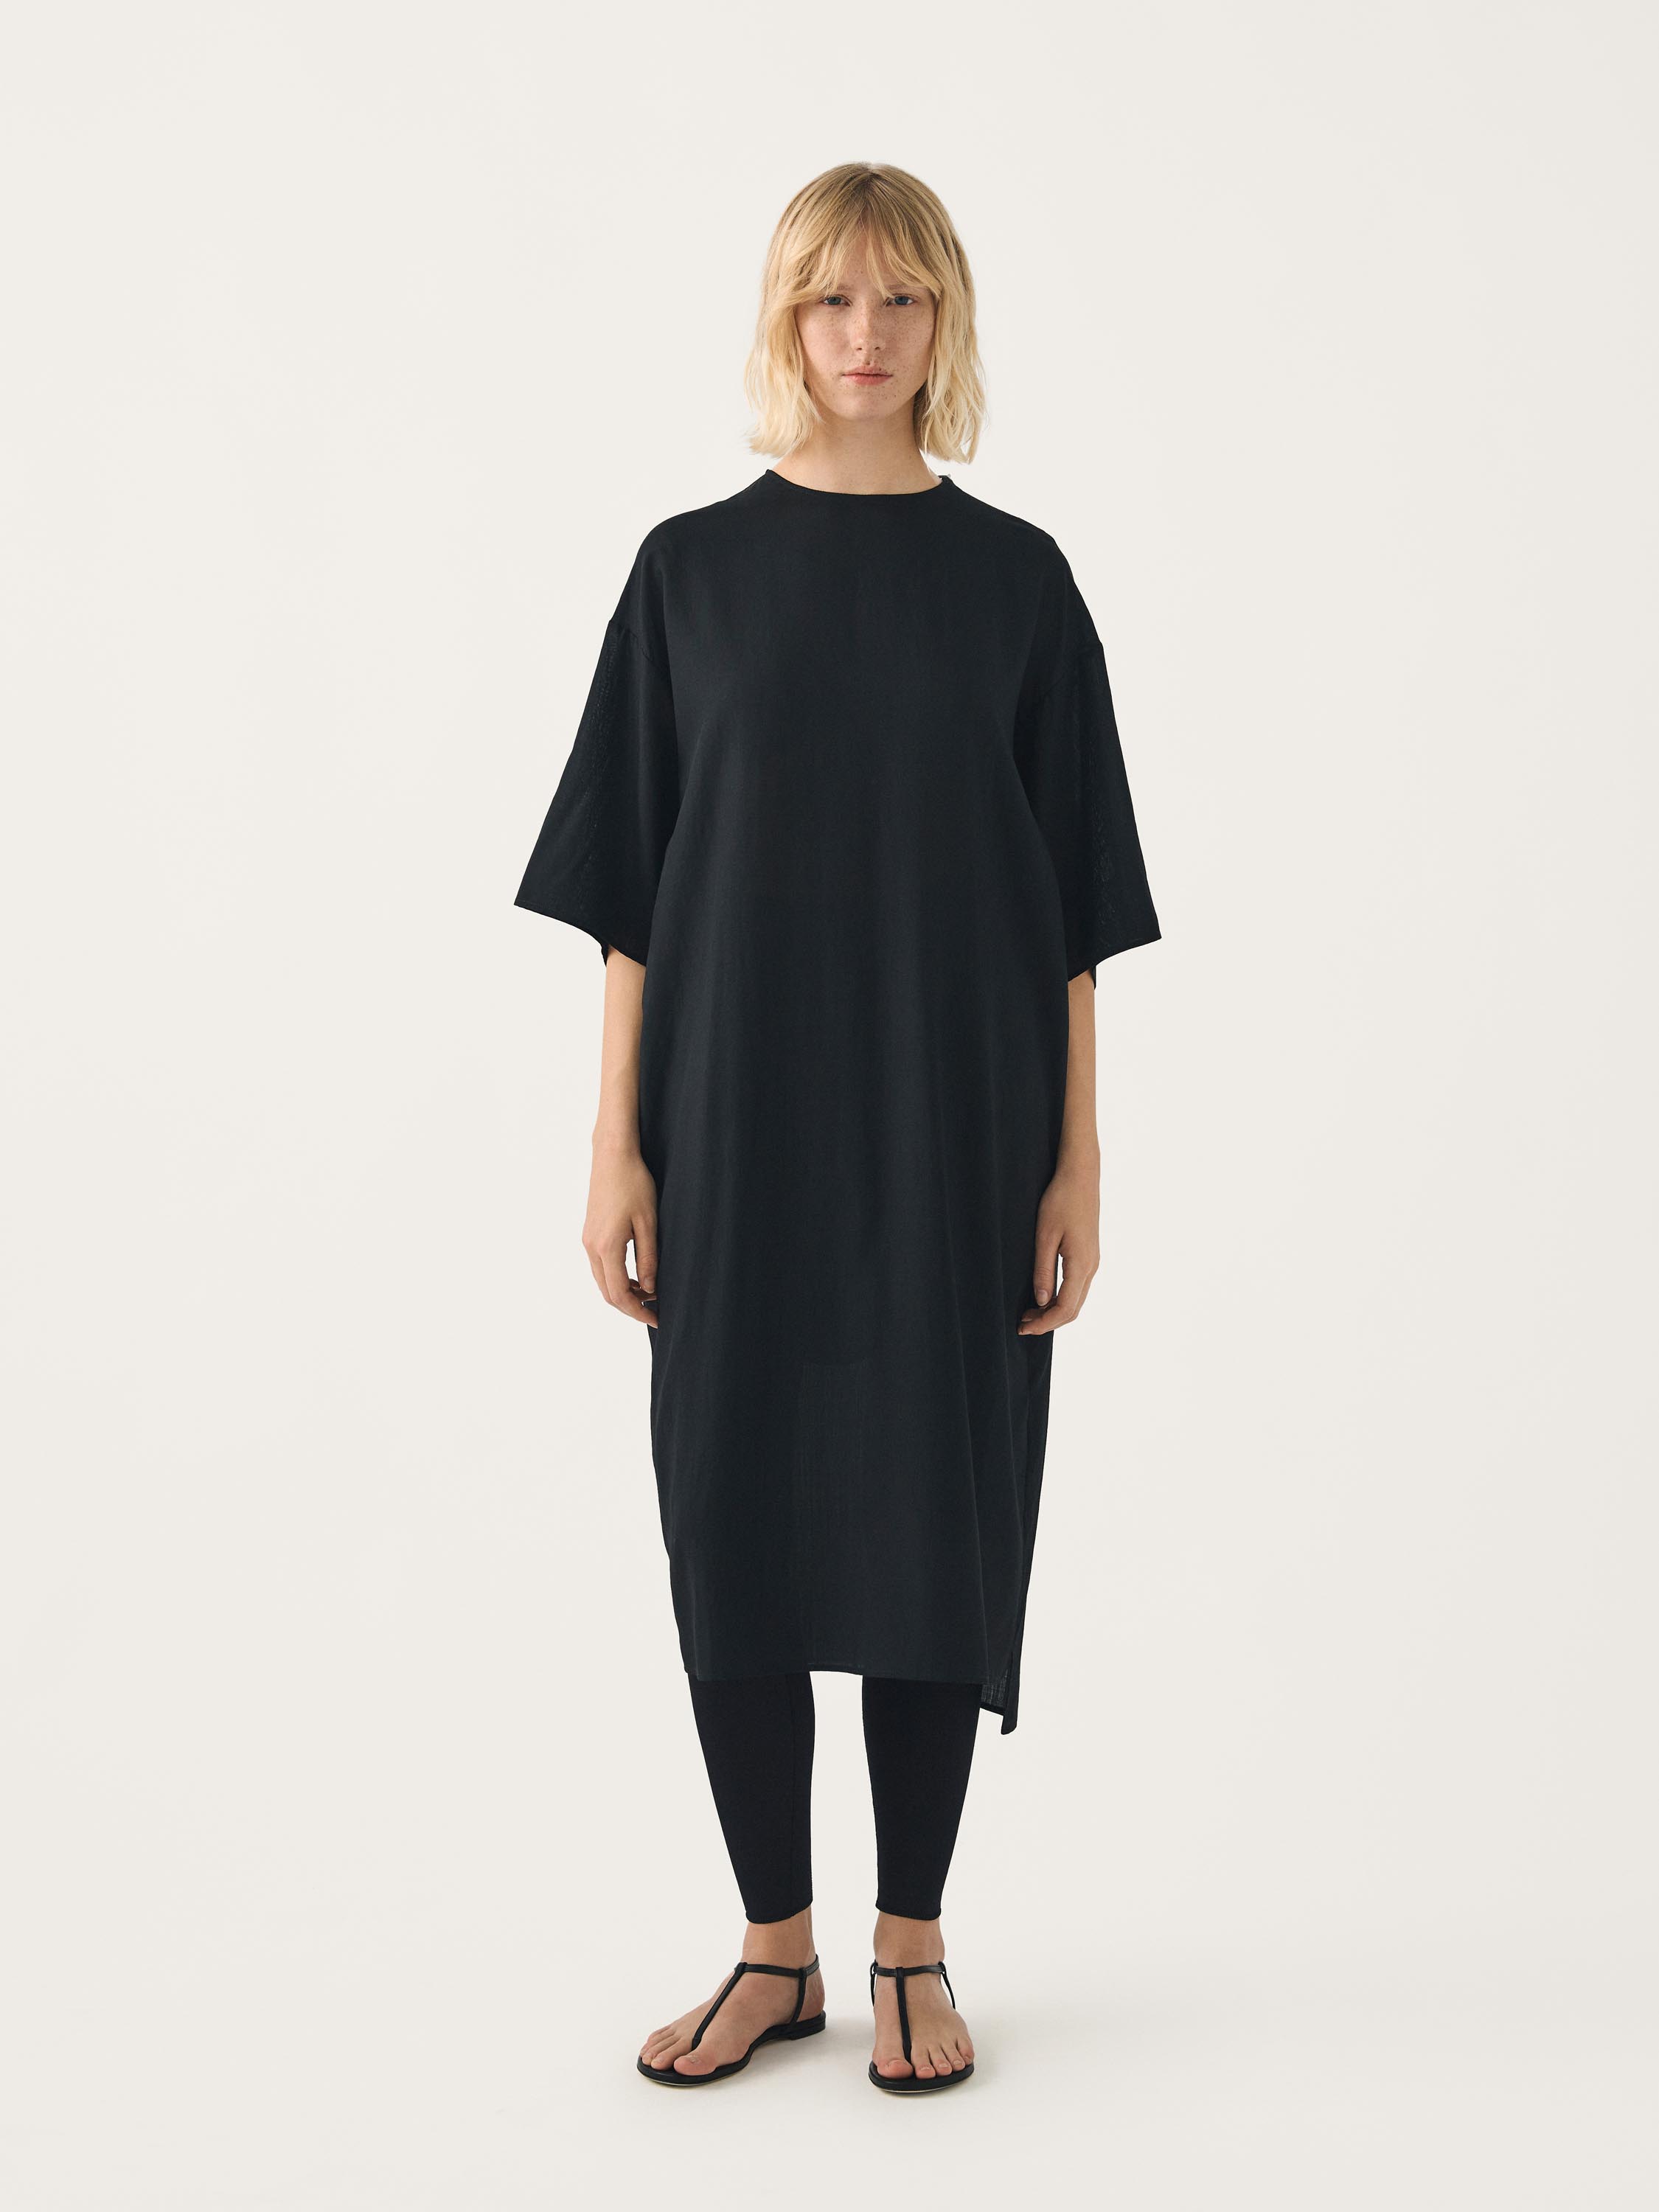 KEON woven t-shirt with elbow-length dress sleeves FFORME 